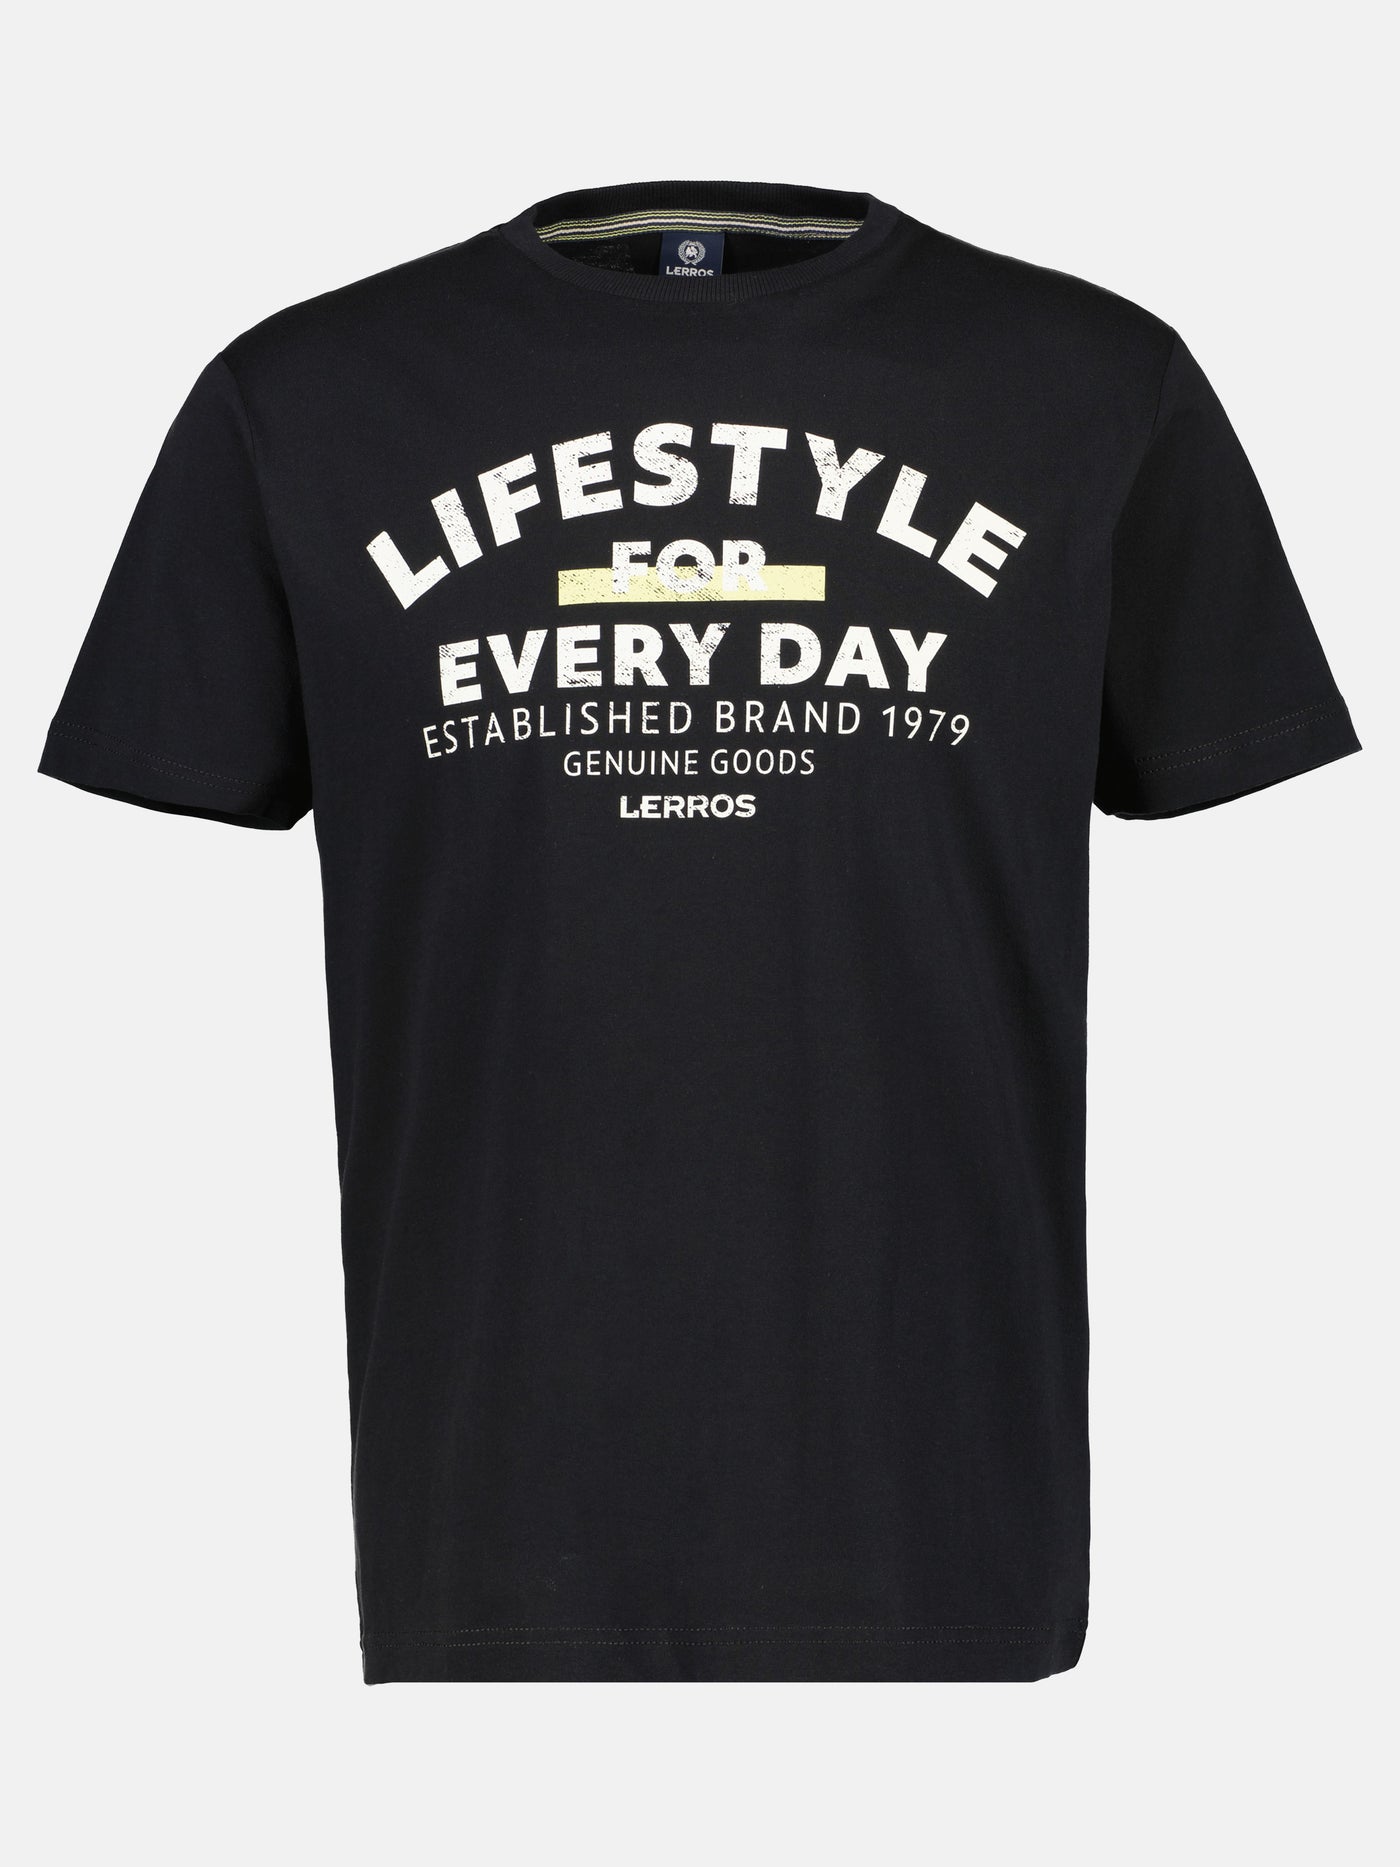 T-Shirt *Lifestyle for day* SHOP – LERROS every